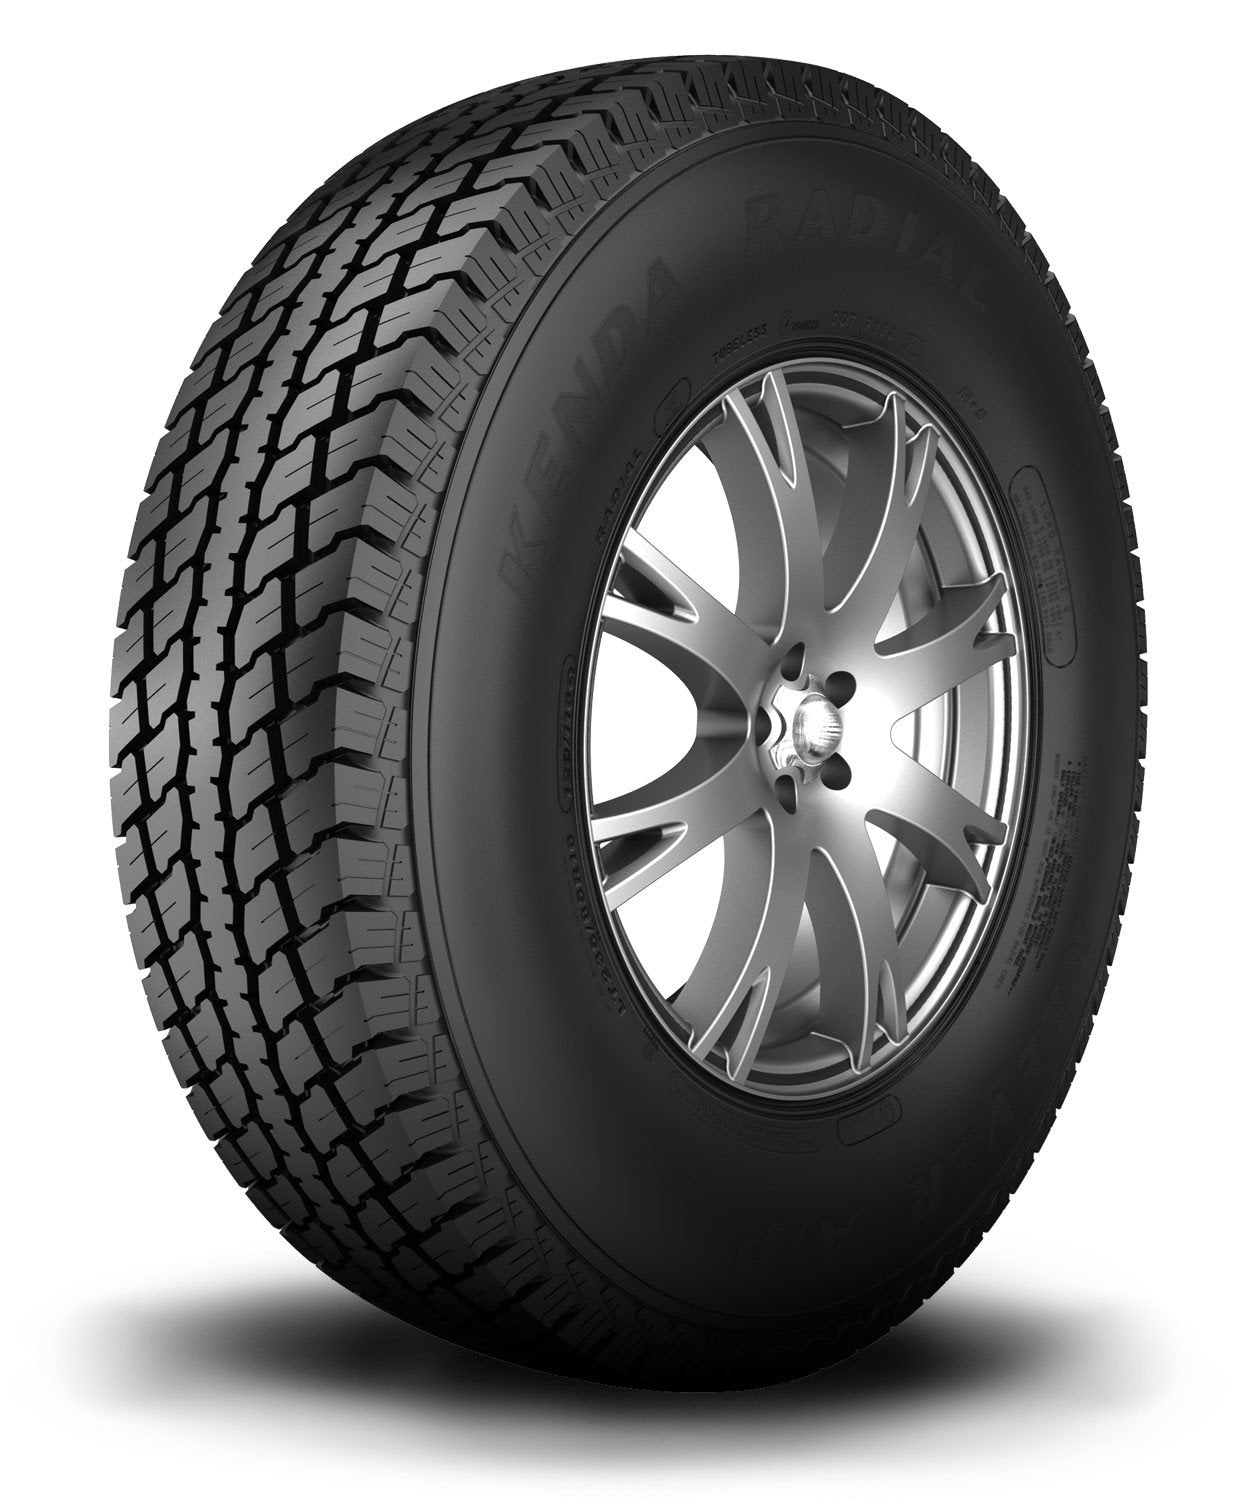 NEW LT 215/85R16 KENDA Klever AP KR05 8 PLY - Tires and Engine Performance